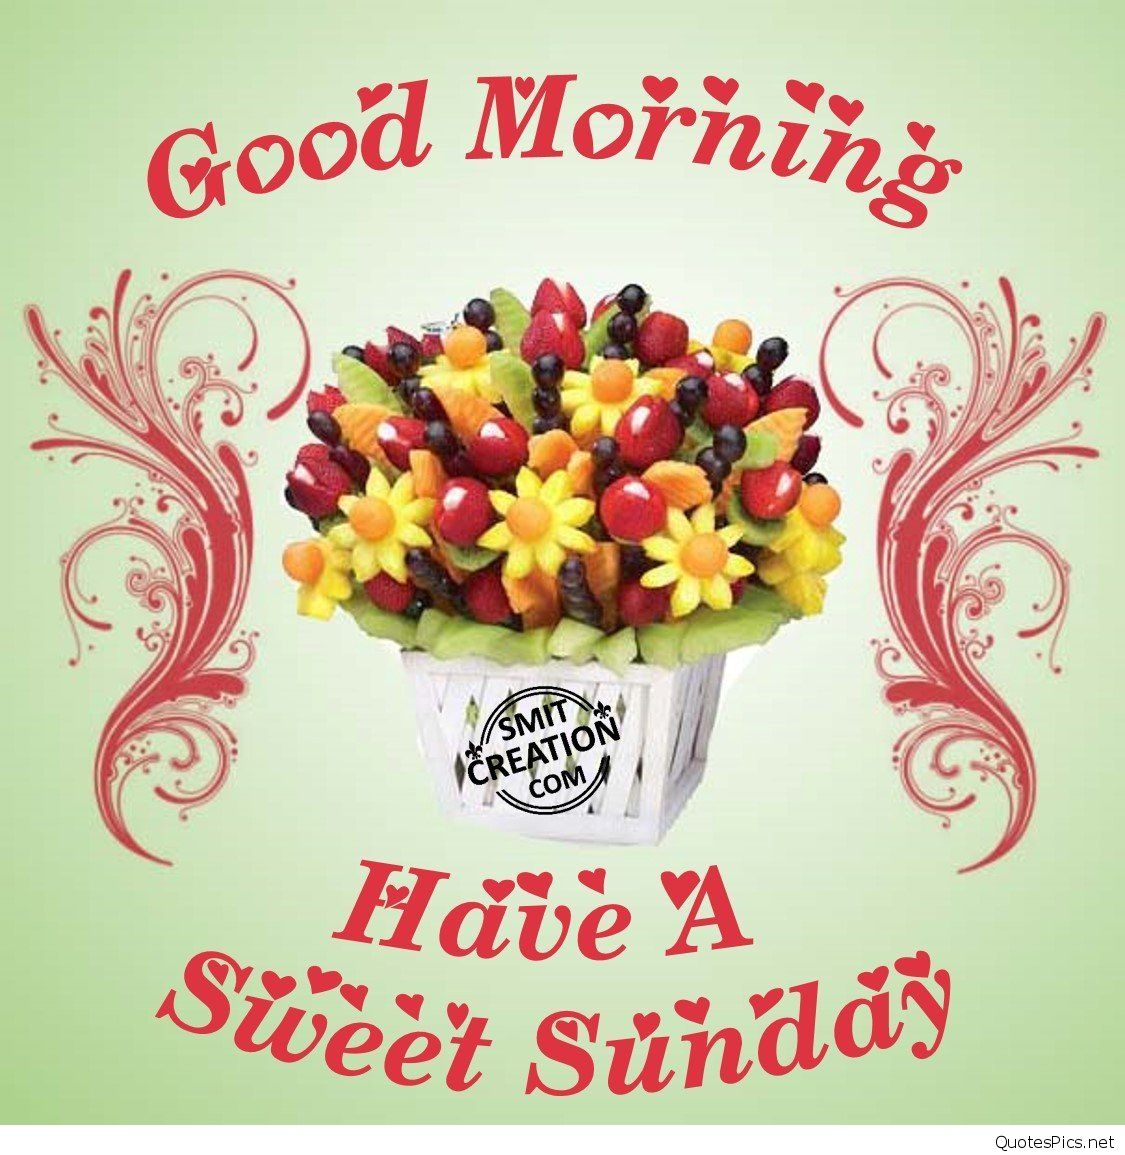 Happy Sunday Morning cards pictures wallpapers hd